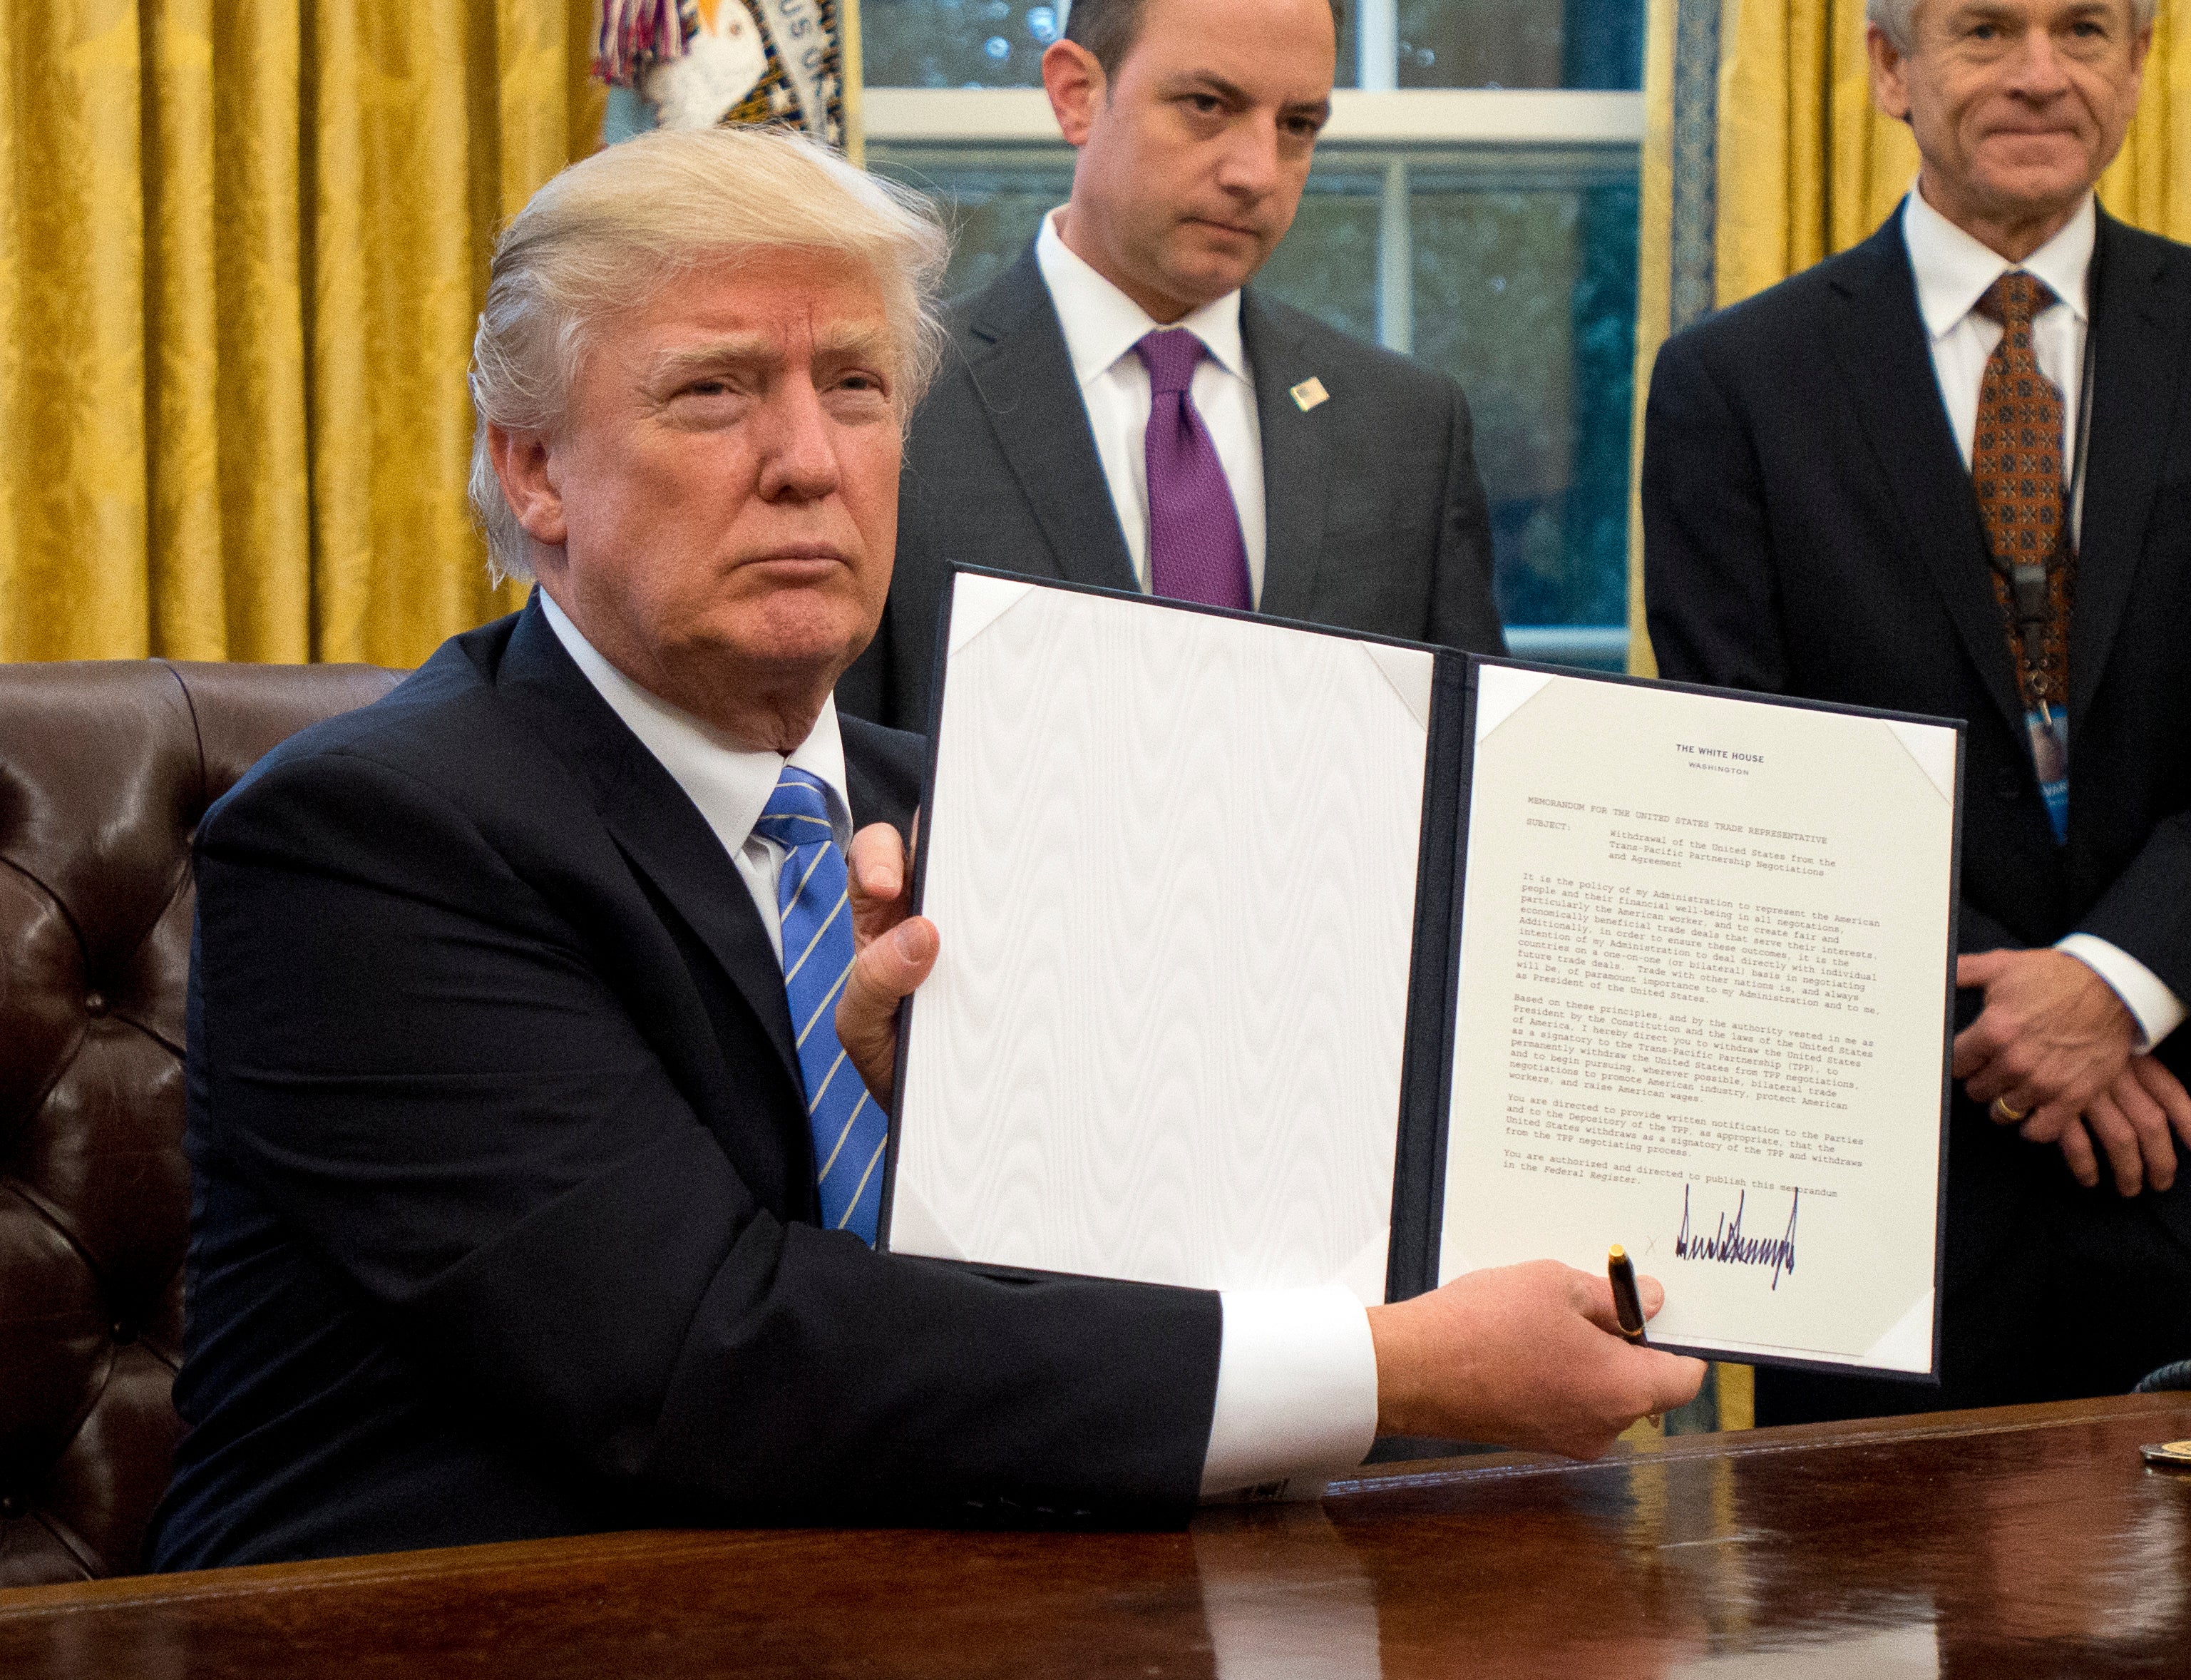 Trump's New Executive Orders To Curb Crime Are Fighting A Problem That Doesn't Exist
